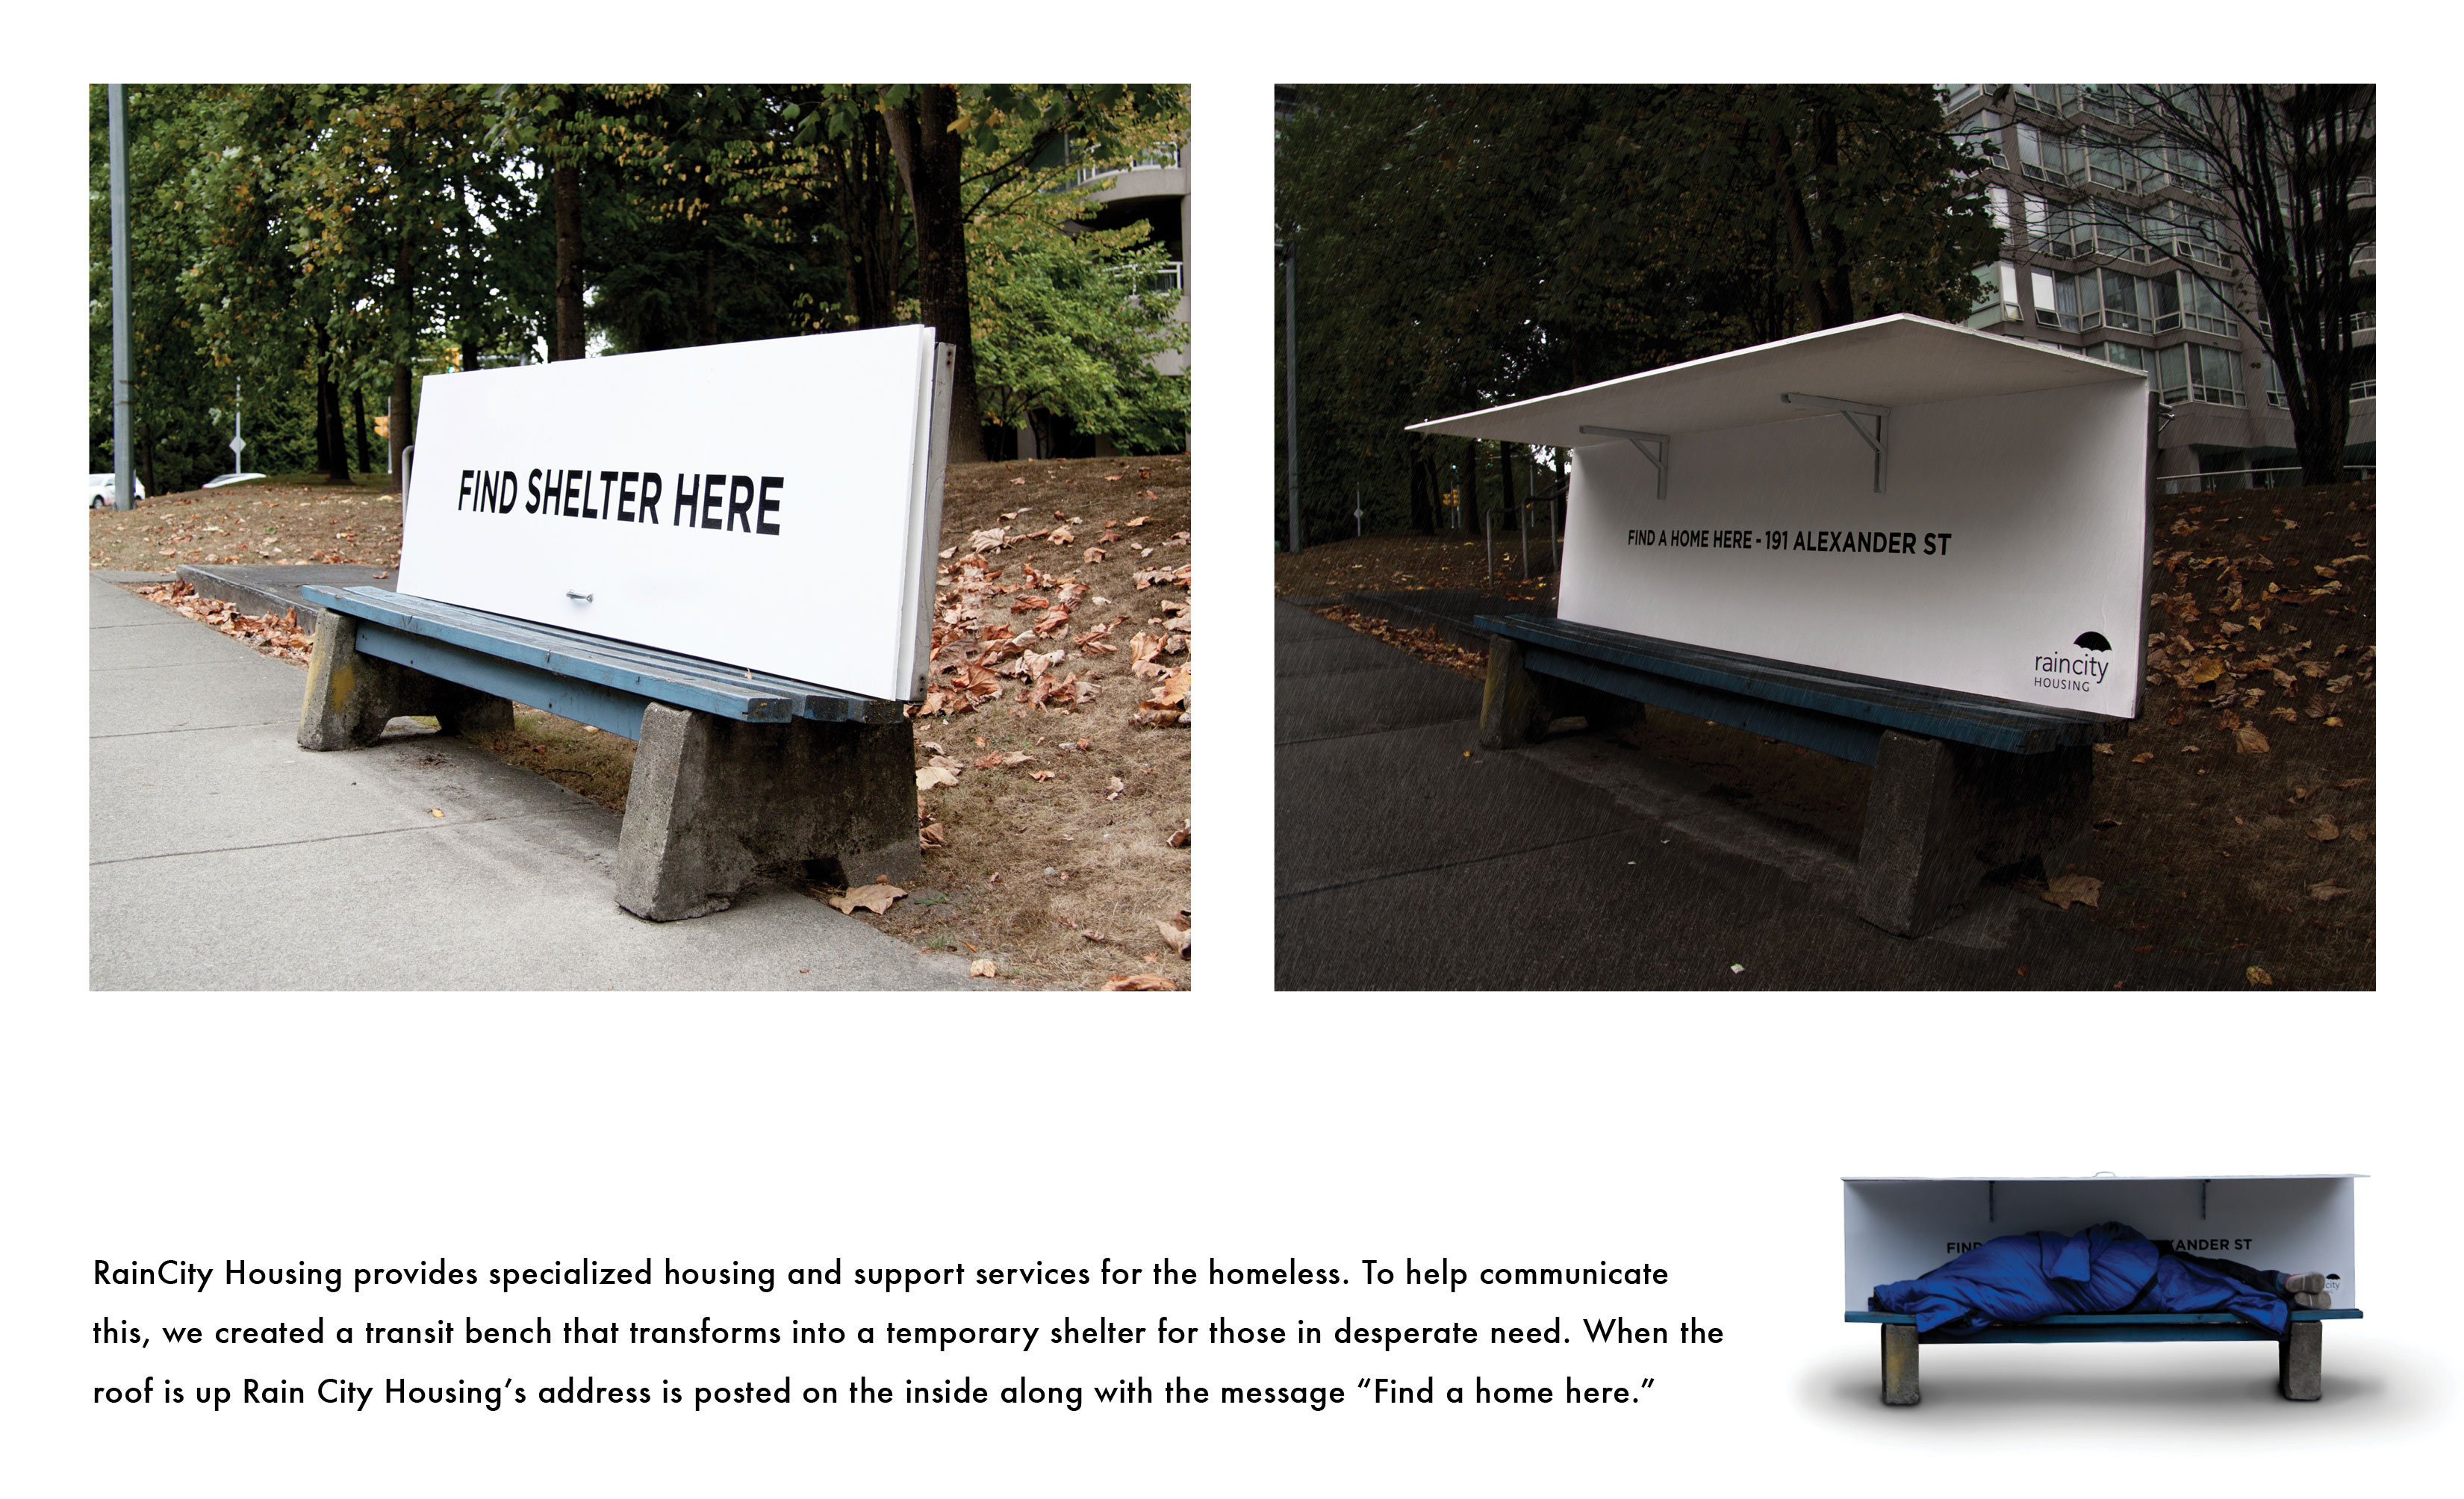 Bench transforms into a temporary shelter. When the roof is up Rain City Housing's address is posted on the inside along with the message "Find a home here". Spring Advertising